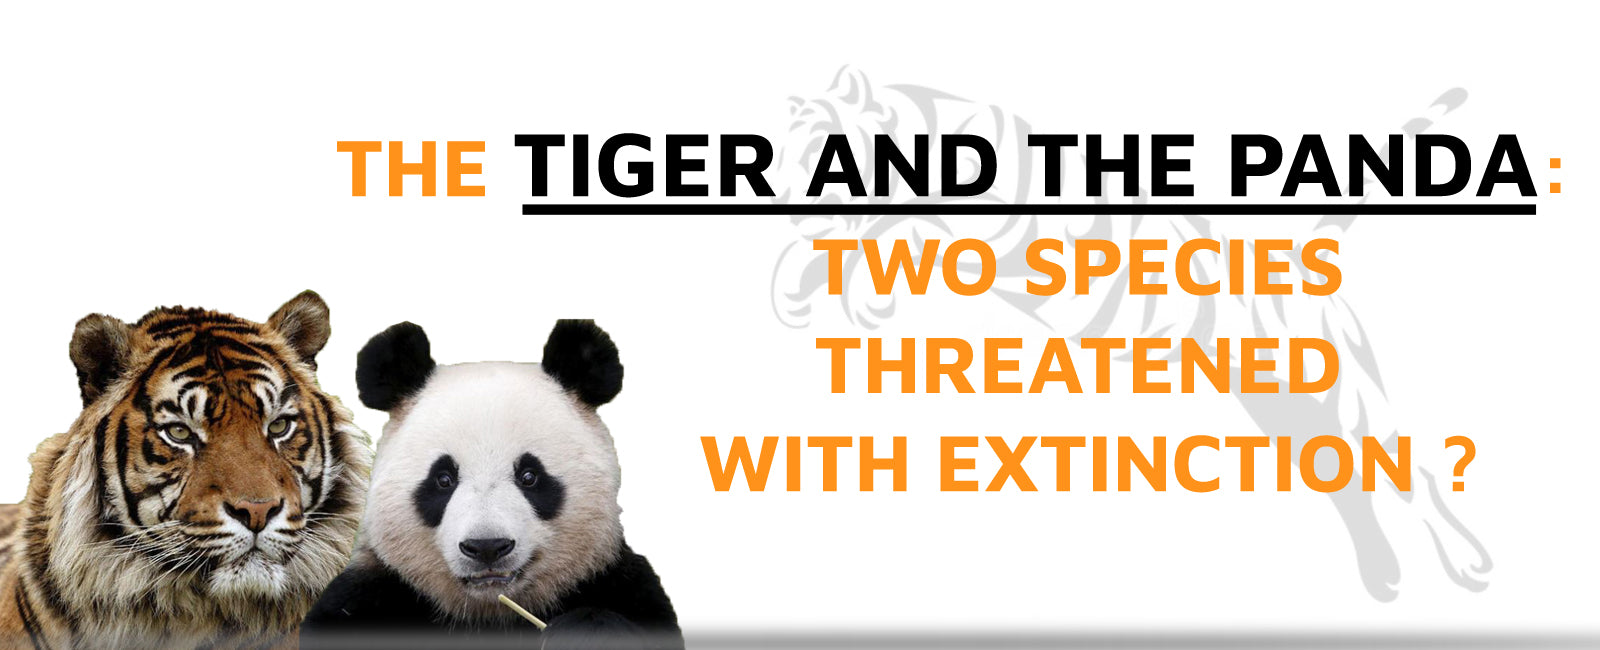 The Tiger and the Panda: Two Species Threatened with Extinction?